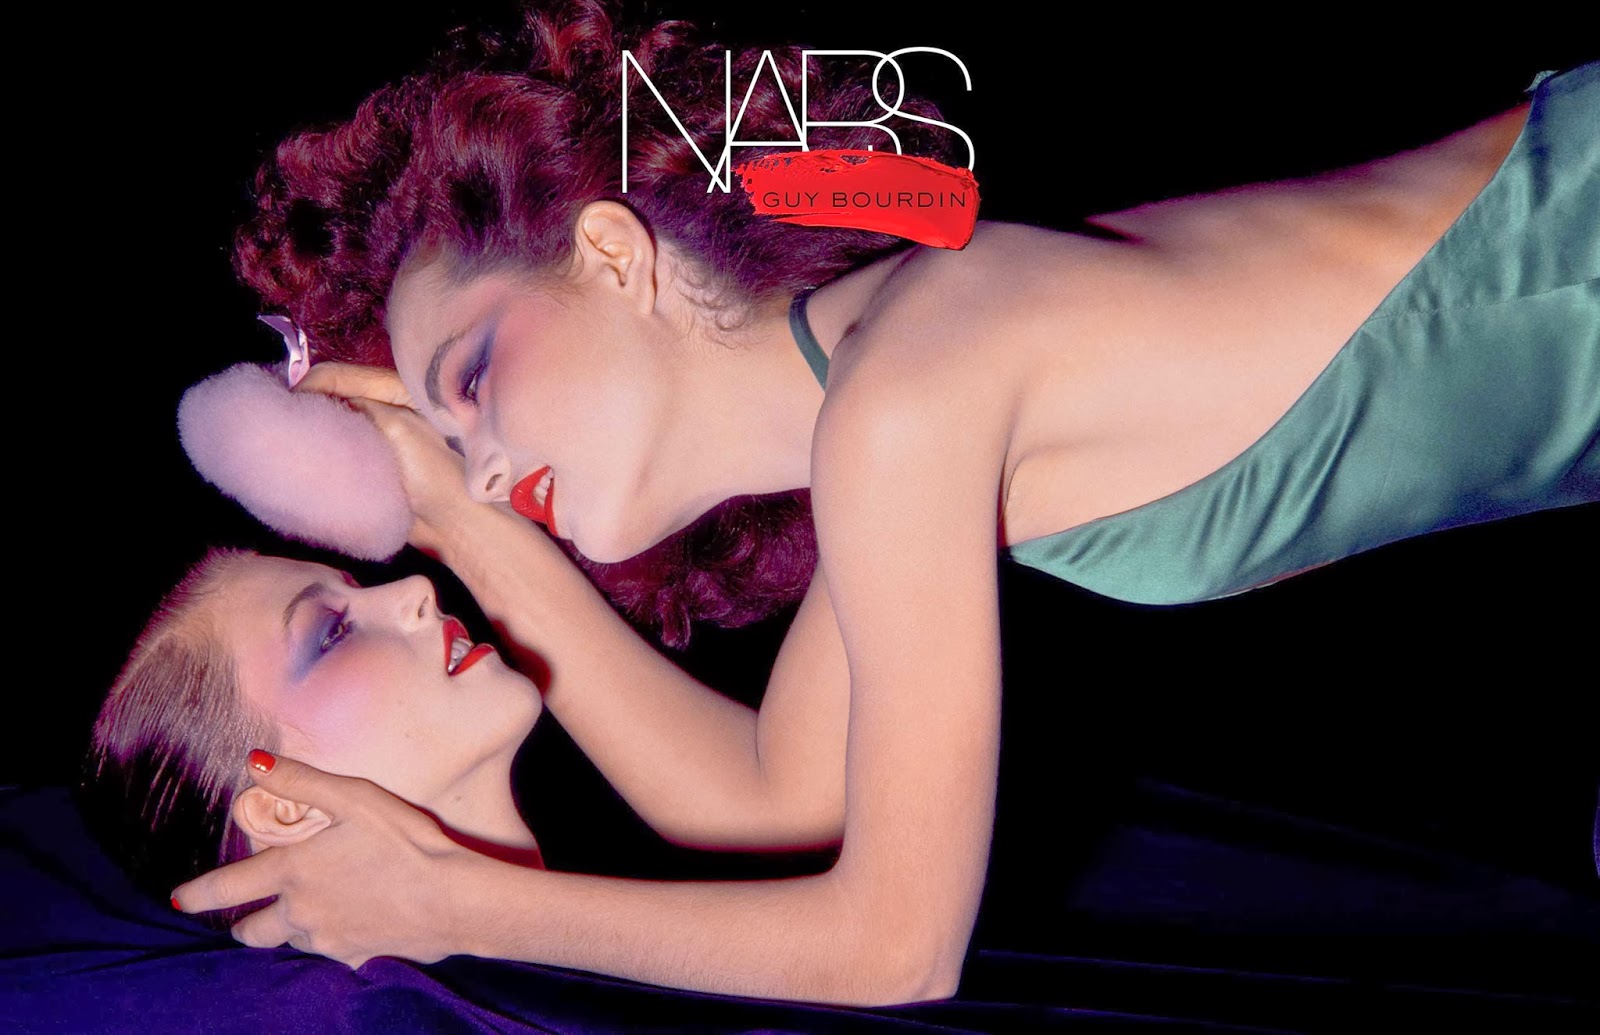 Love it the NARS / Guy Bourdin Holiday collection picture